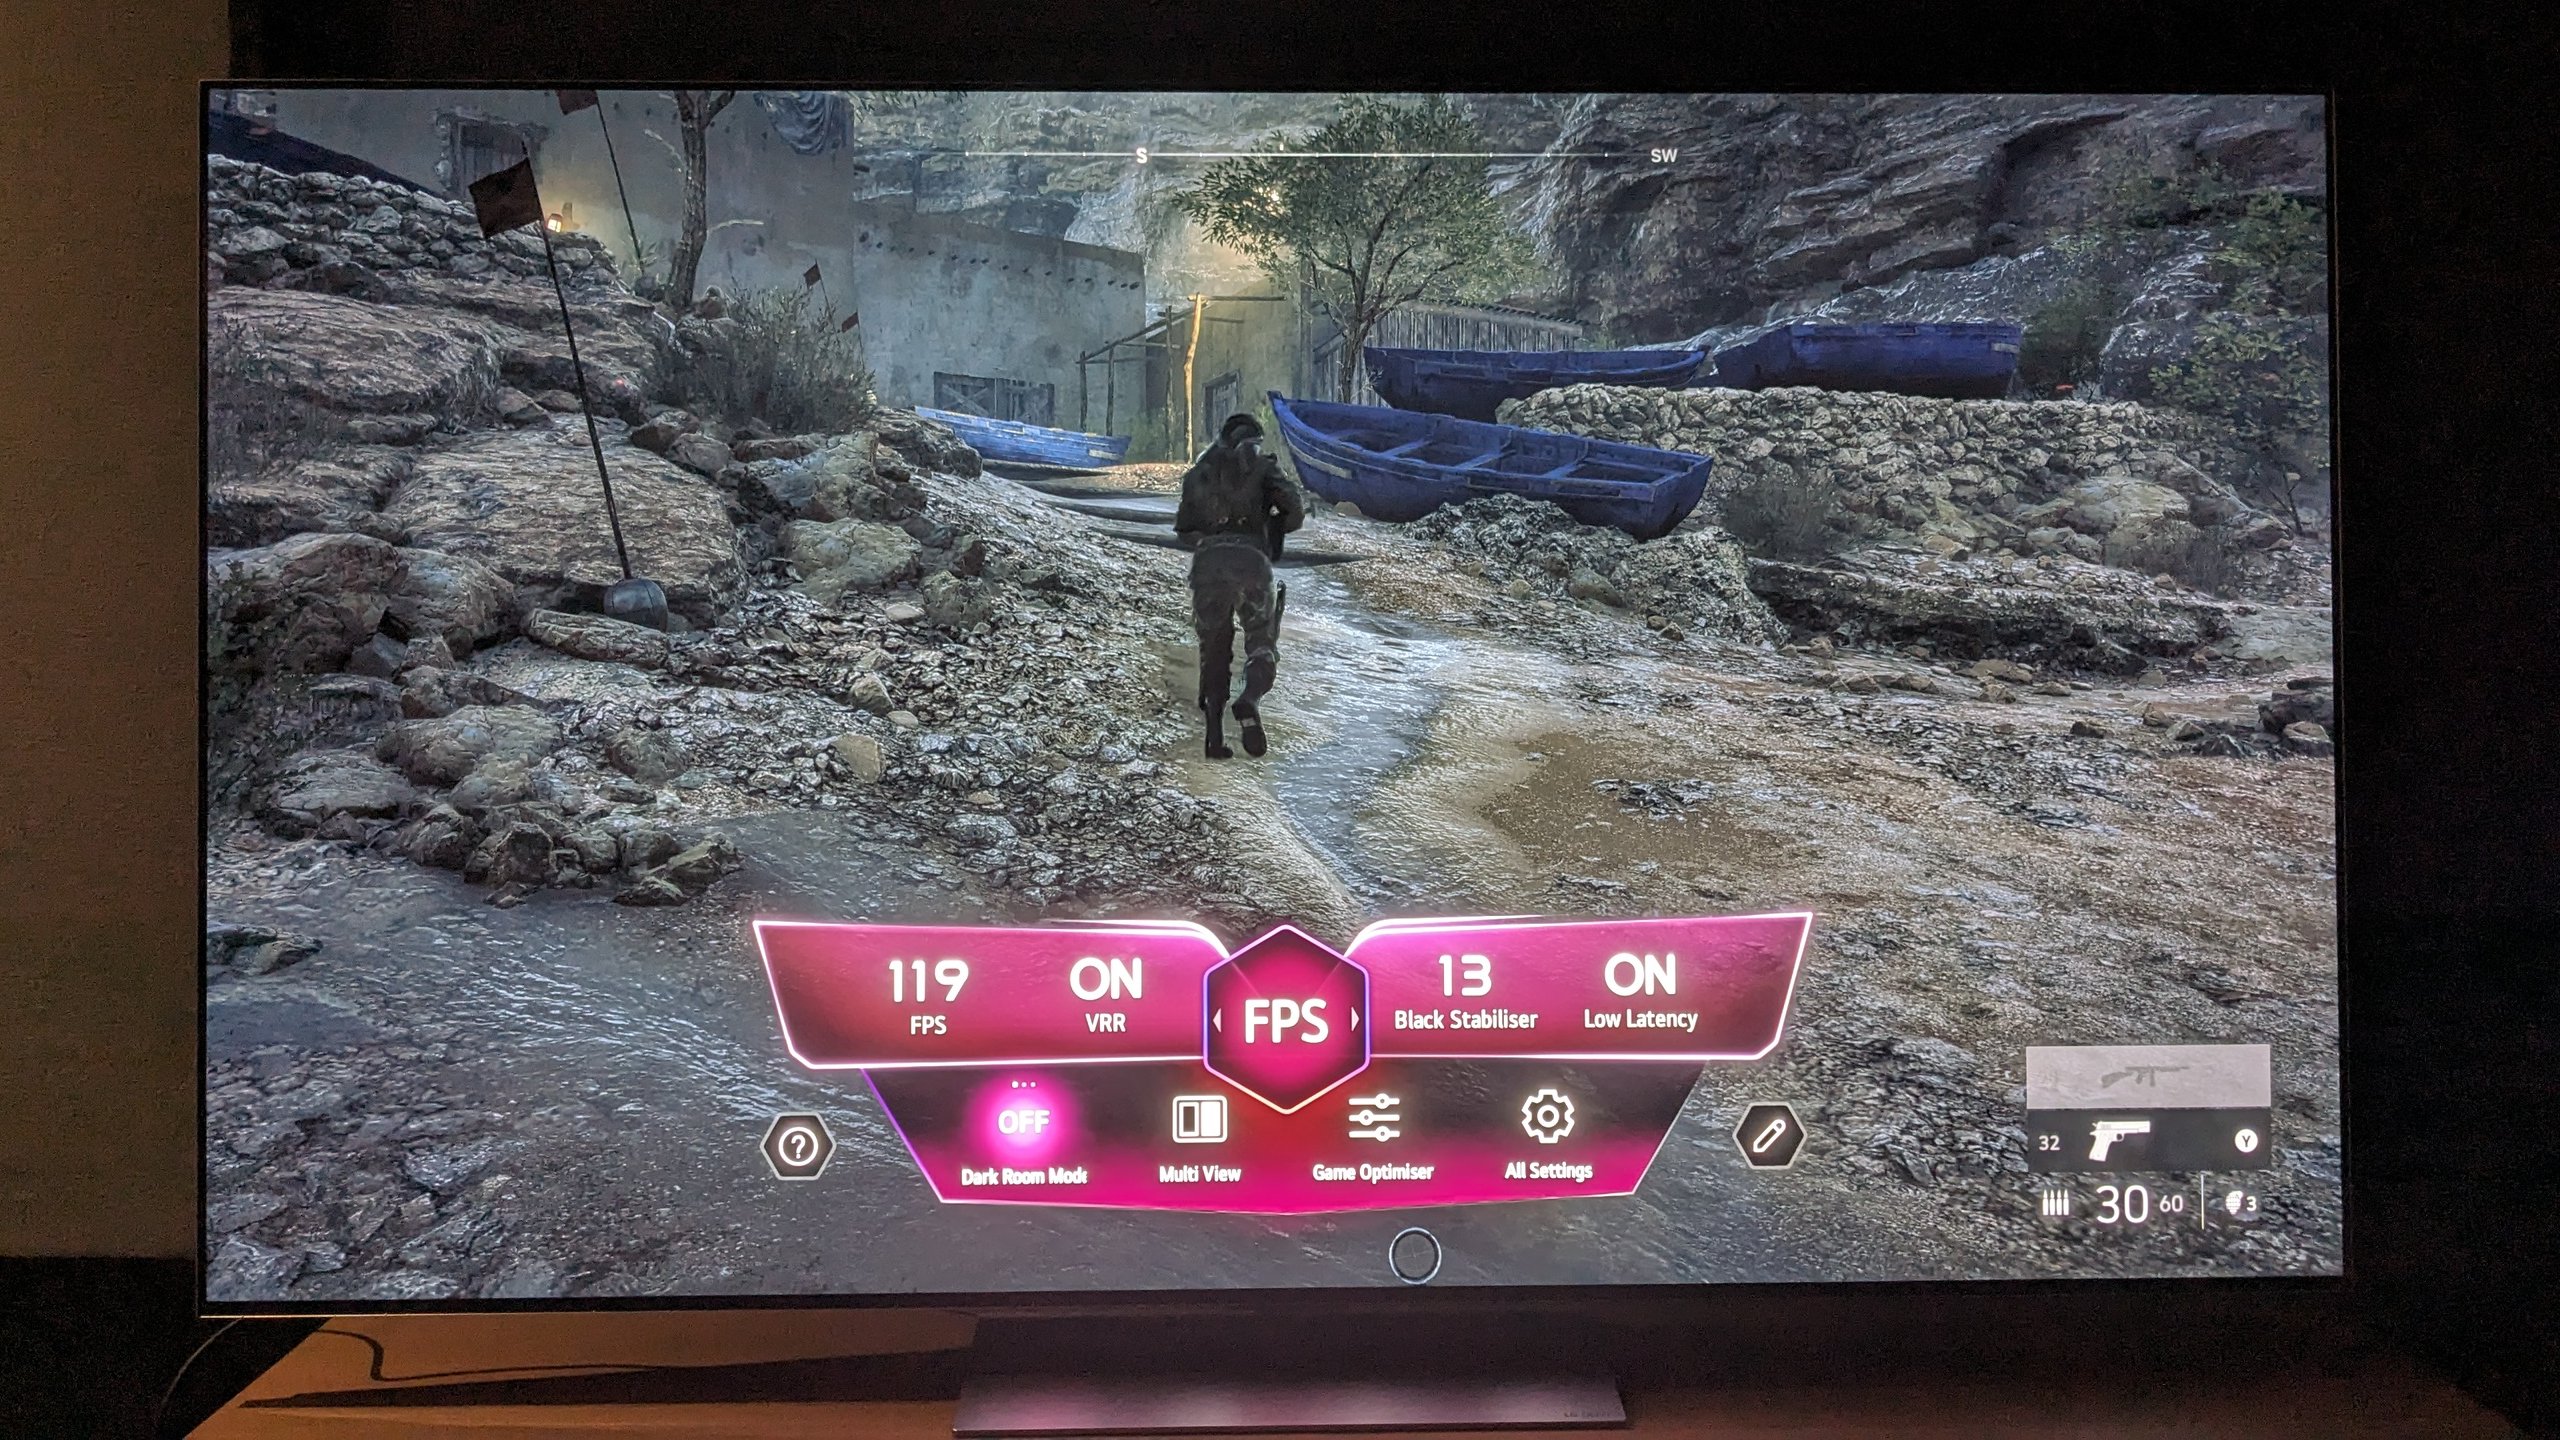 LG G3 with Battlefield V and game bar on screen